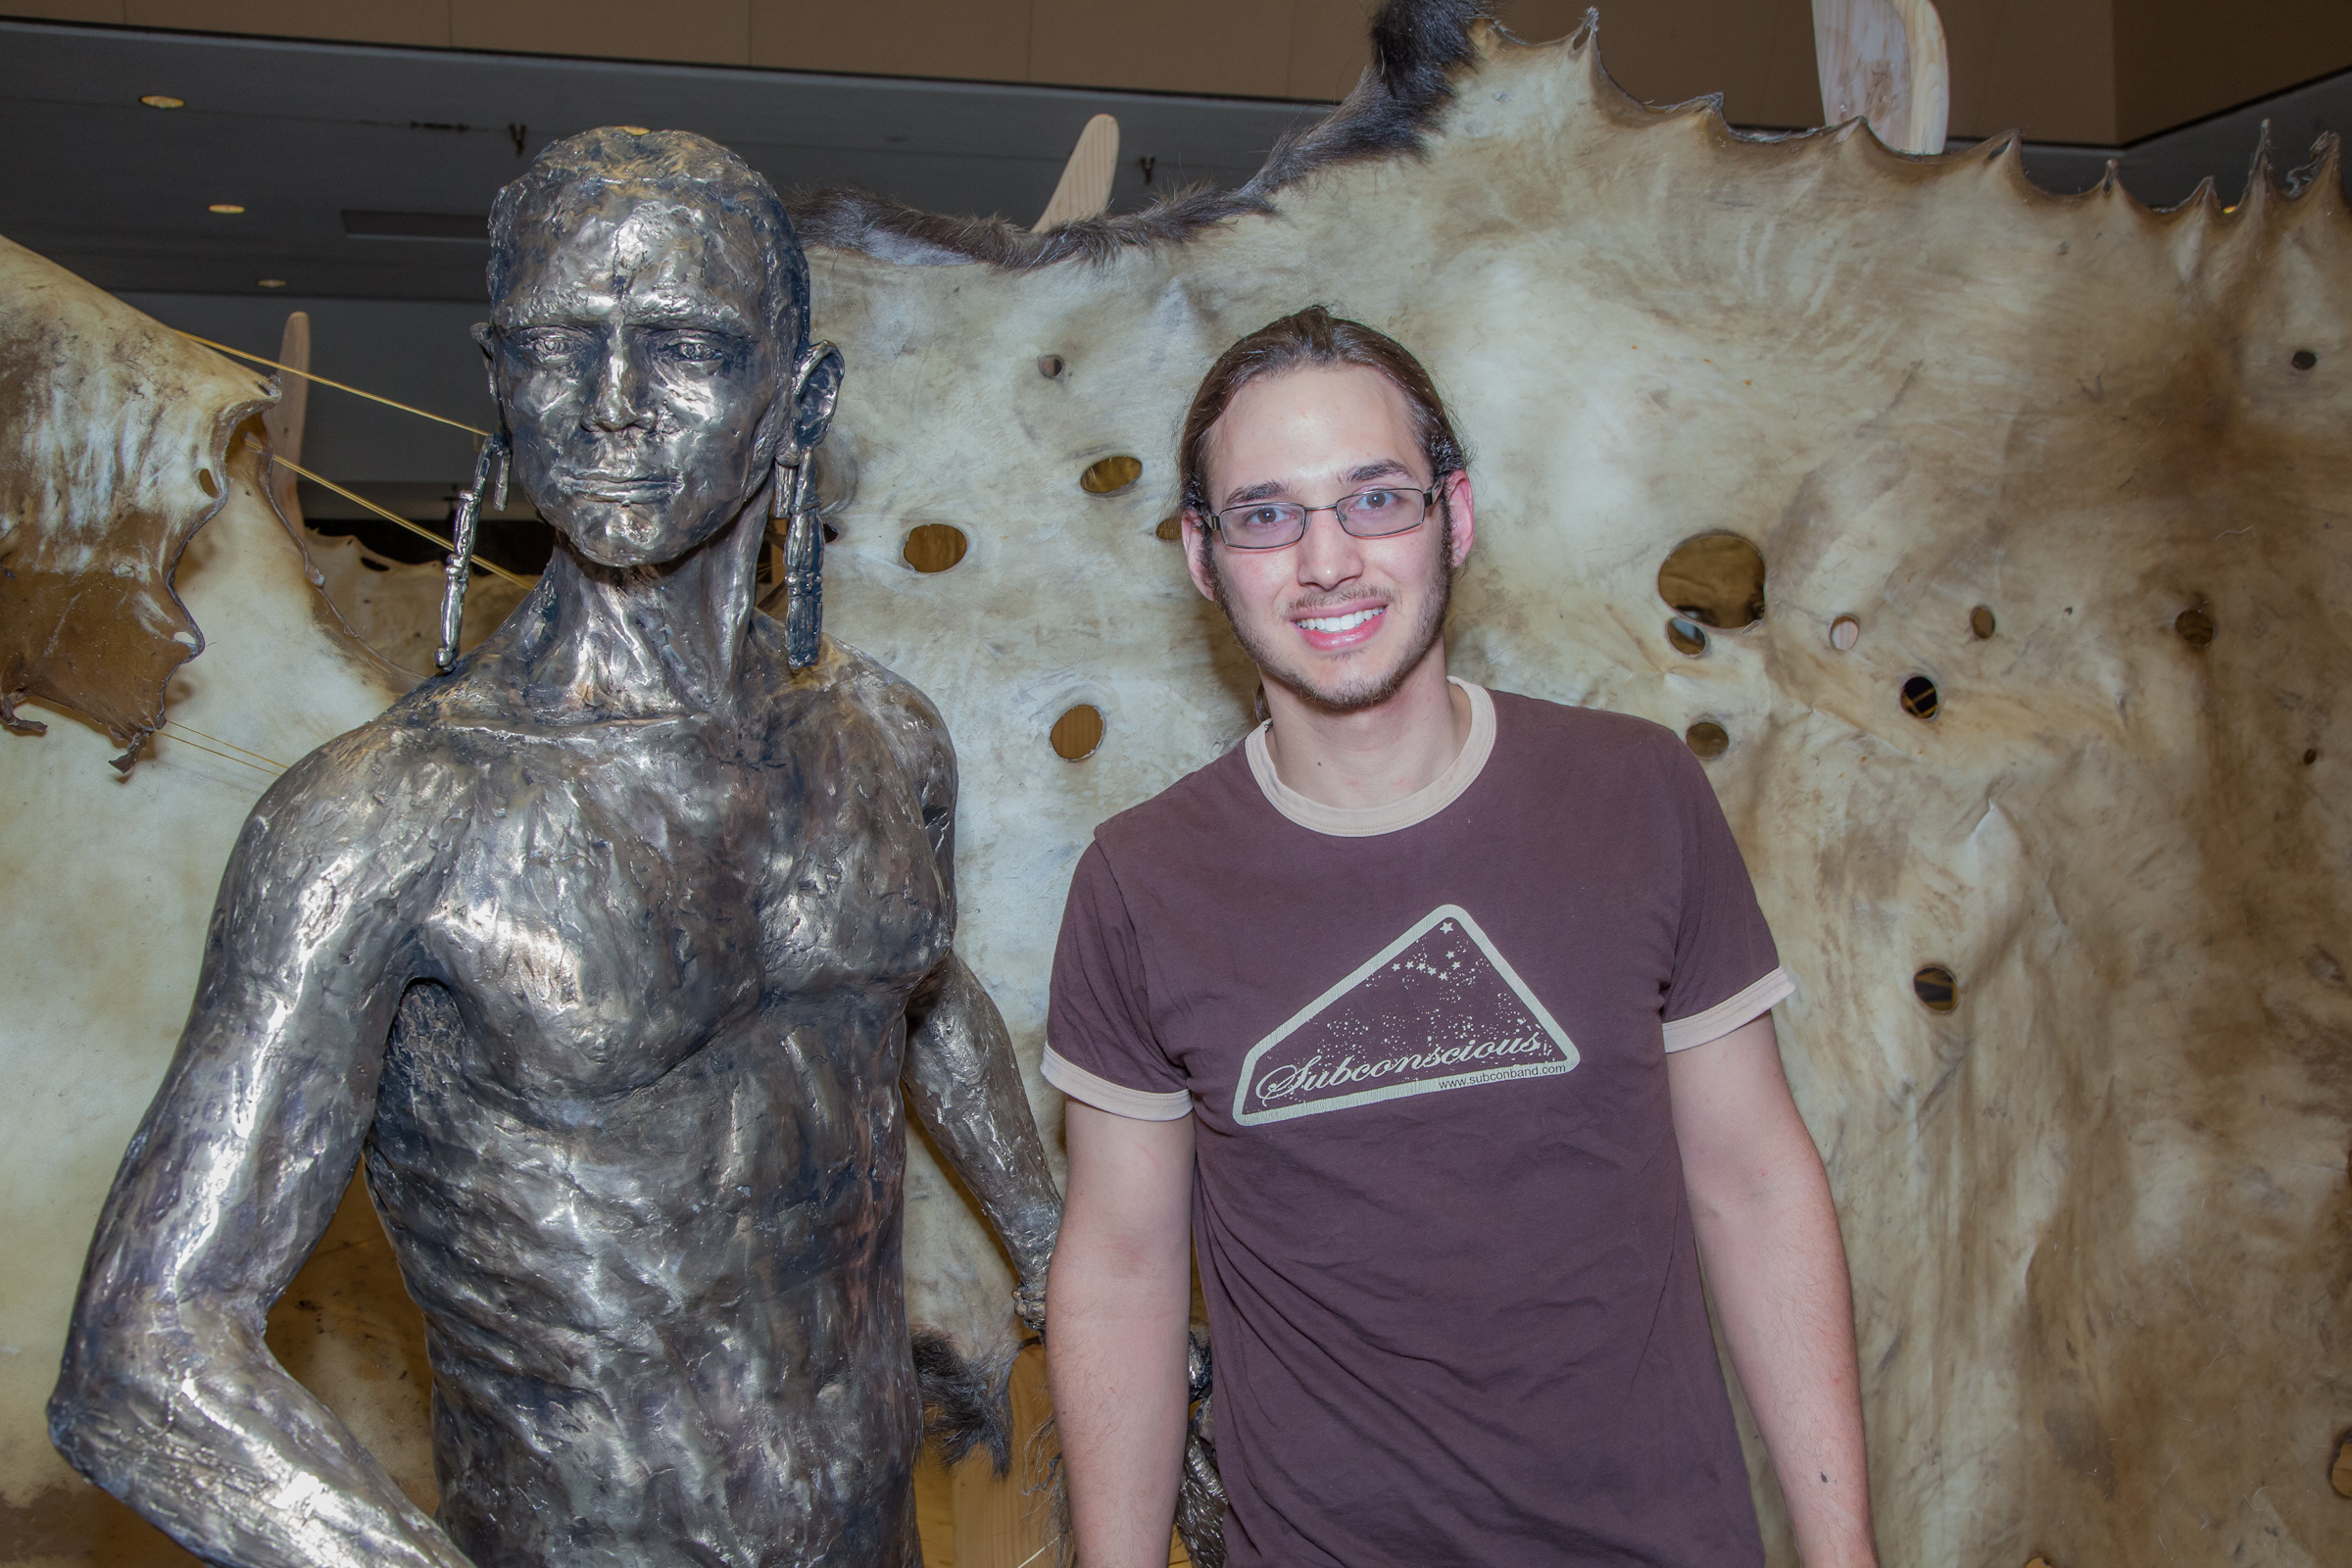 Senior art major Joel Isaak stands next to life-sized bronze sculpture he made as part of his senior thesis project during its display in the Great Hall. | UAF Photo by Todd Paris